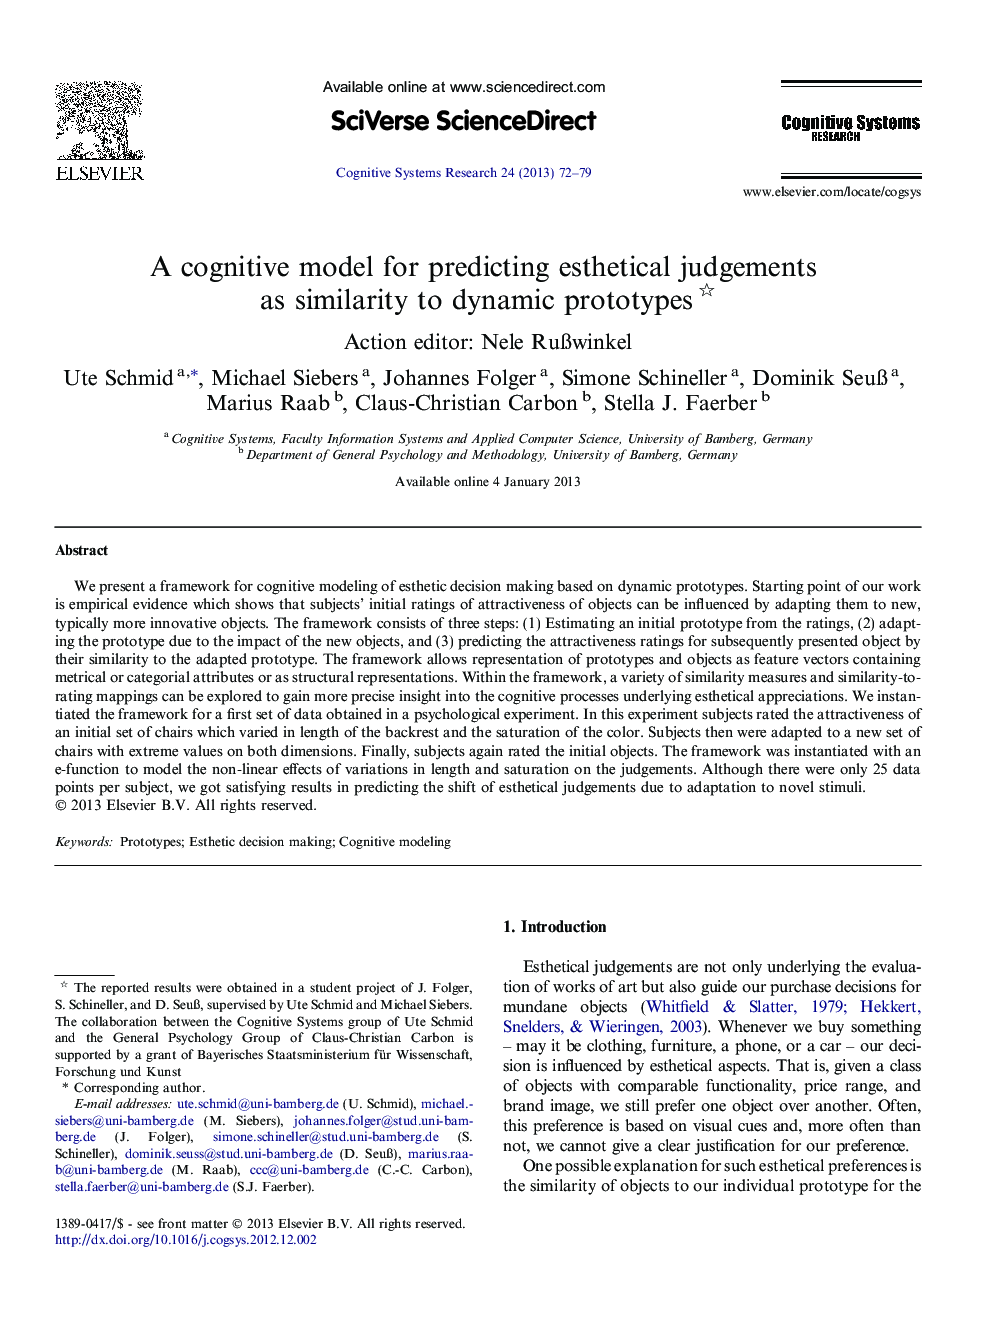 A cognitive model for predicting esthetical judgements as similarity to dynamic prototypes 